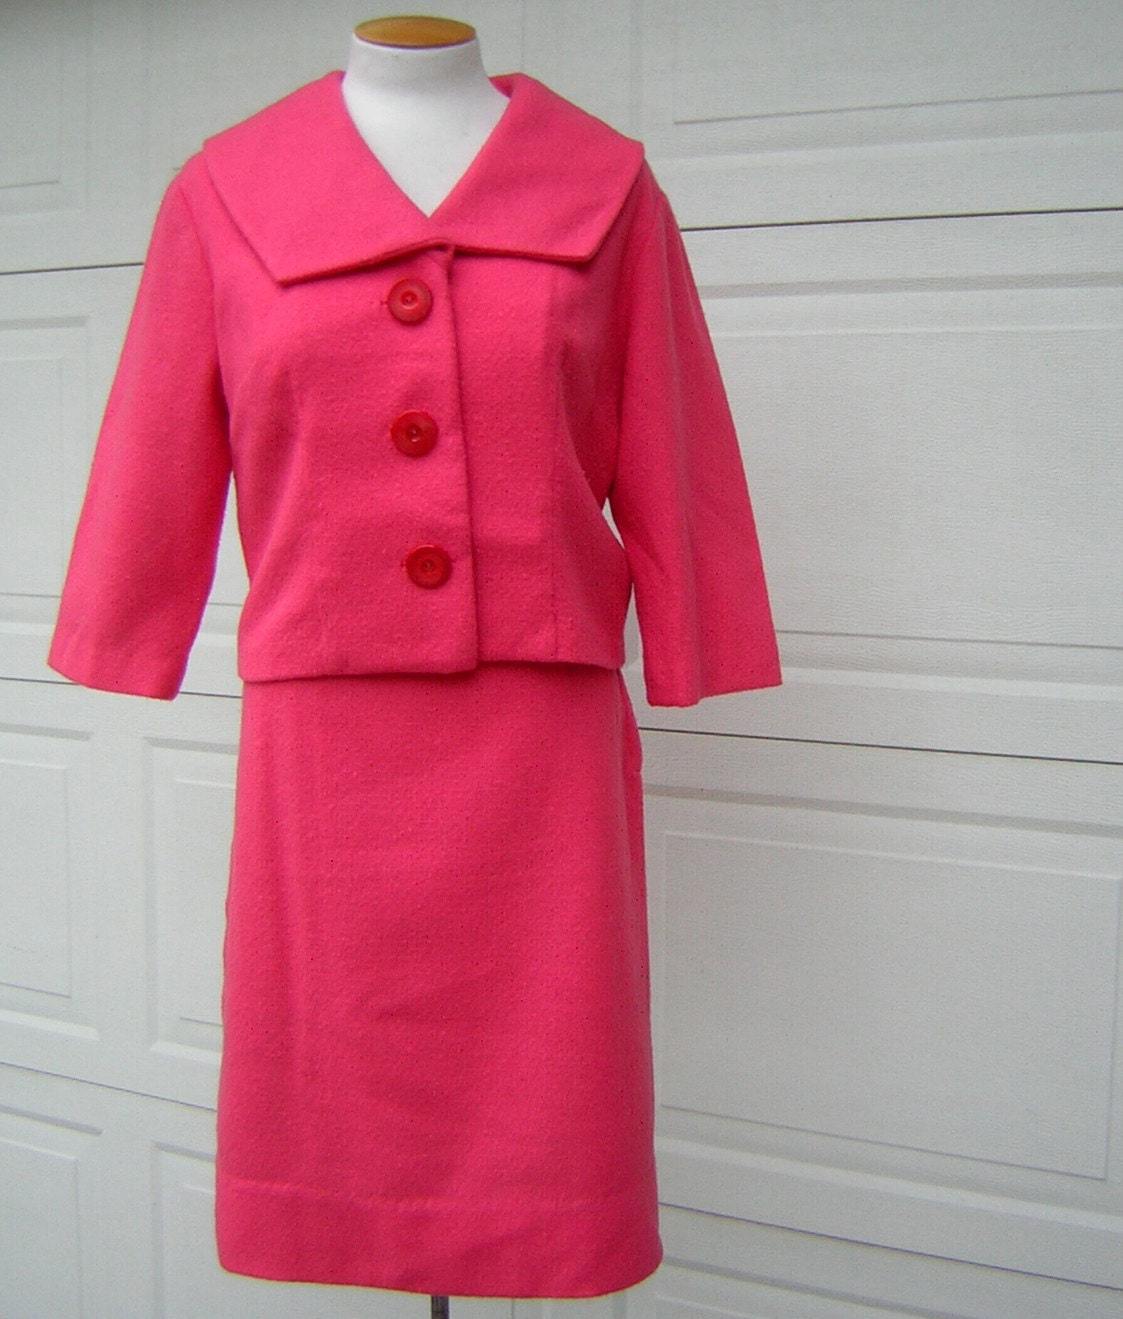 Hot Pink Suit 1960s Wool Vintage Jackie O Custom Made Size S